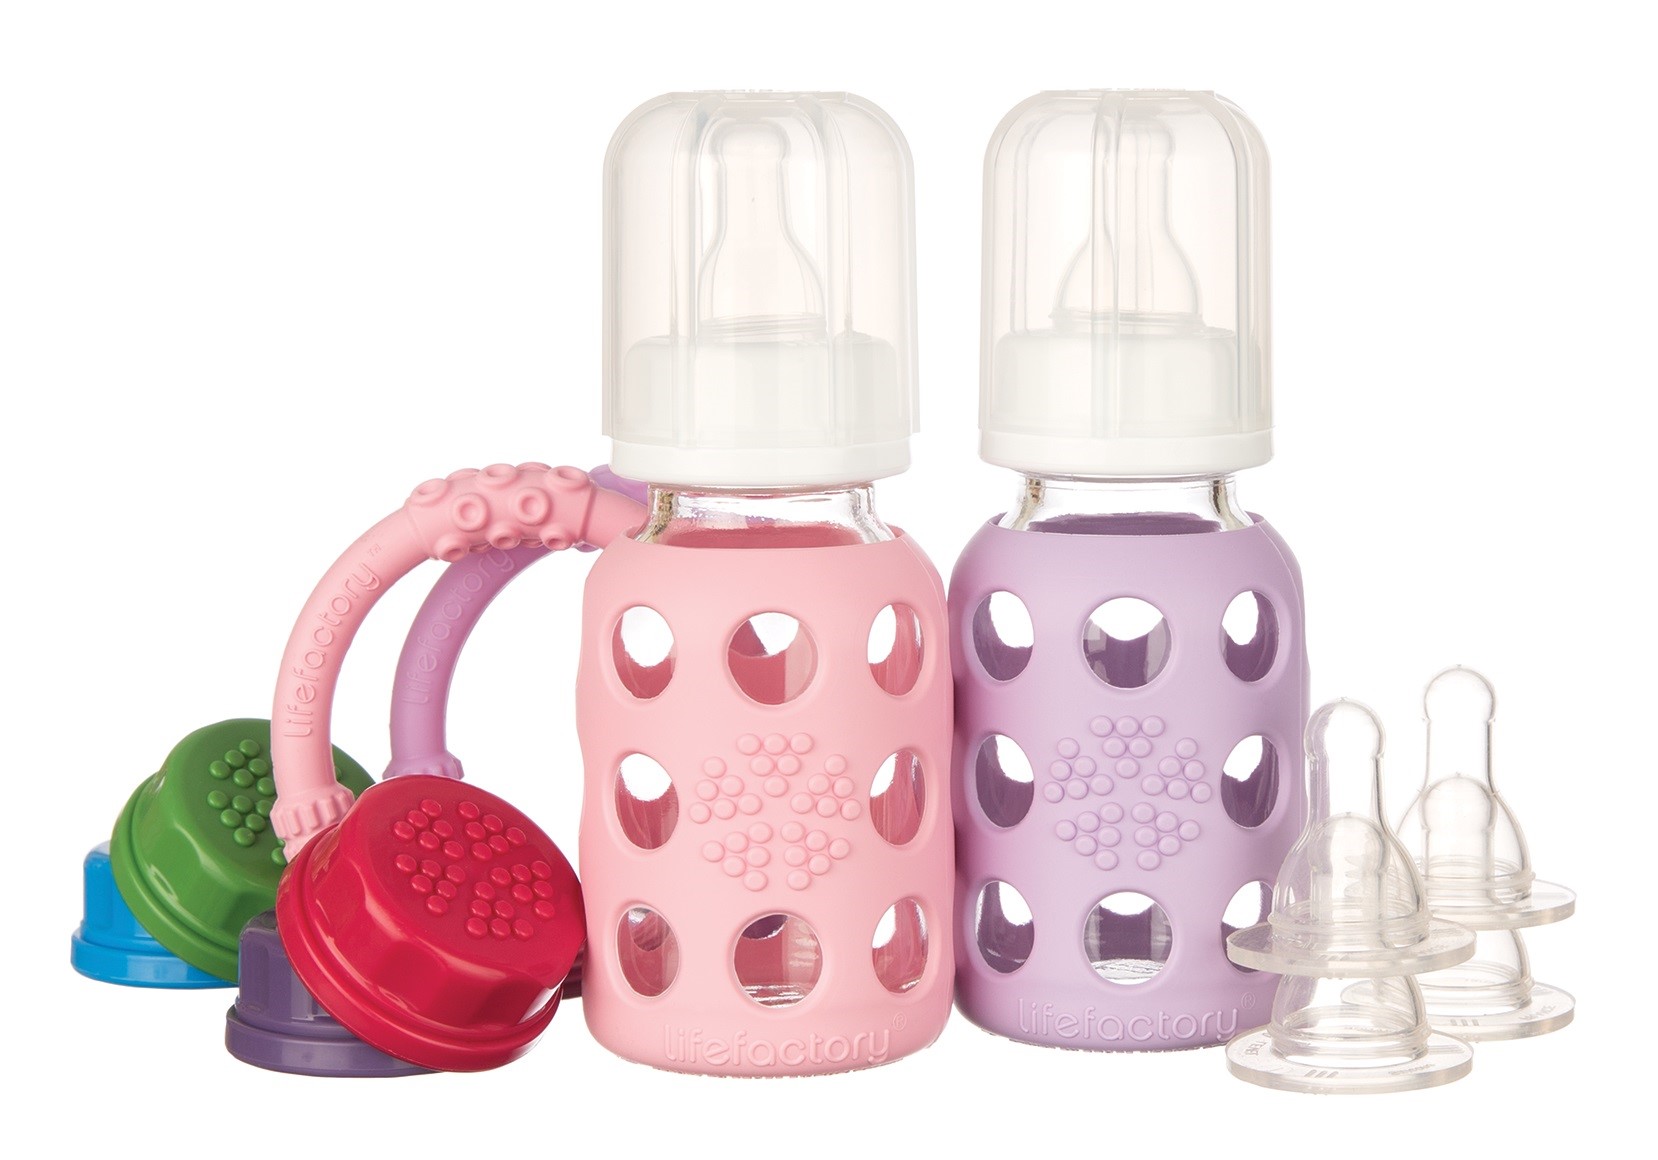 Two-Bottle Starter Set with 4-Ounce Glass Bottles, Teether Set, Nipple Set, and Flat Cap Set - image 1 of 4